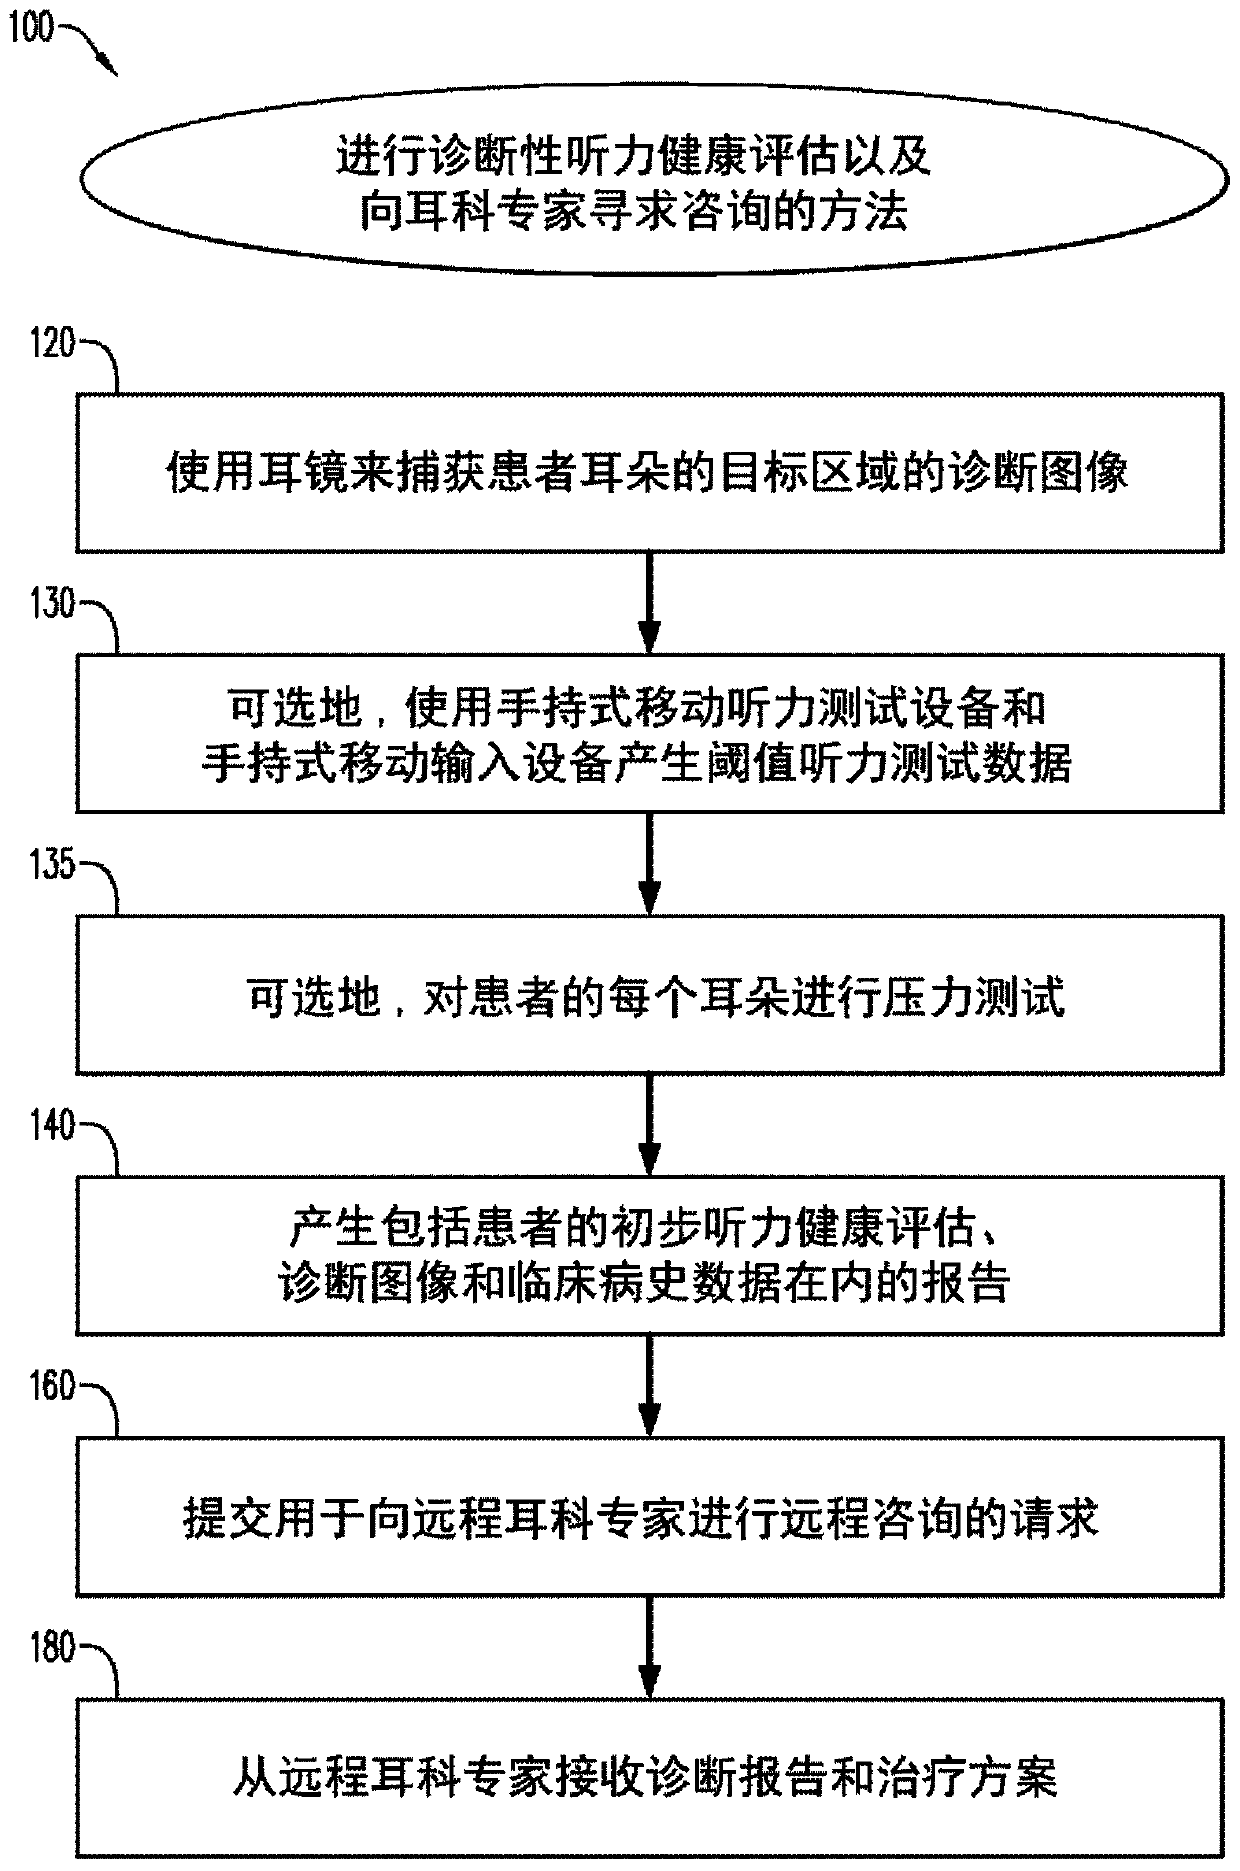 Diagnostic hearing health assessment system and method